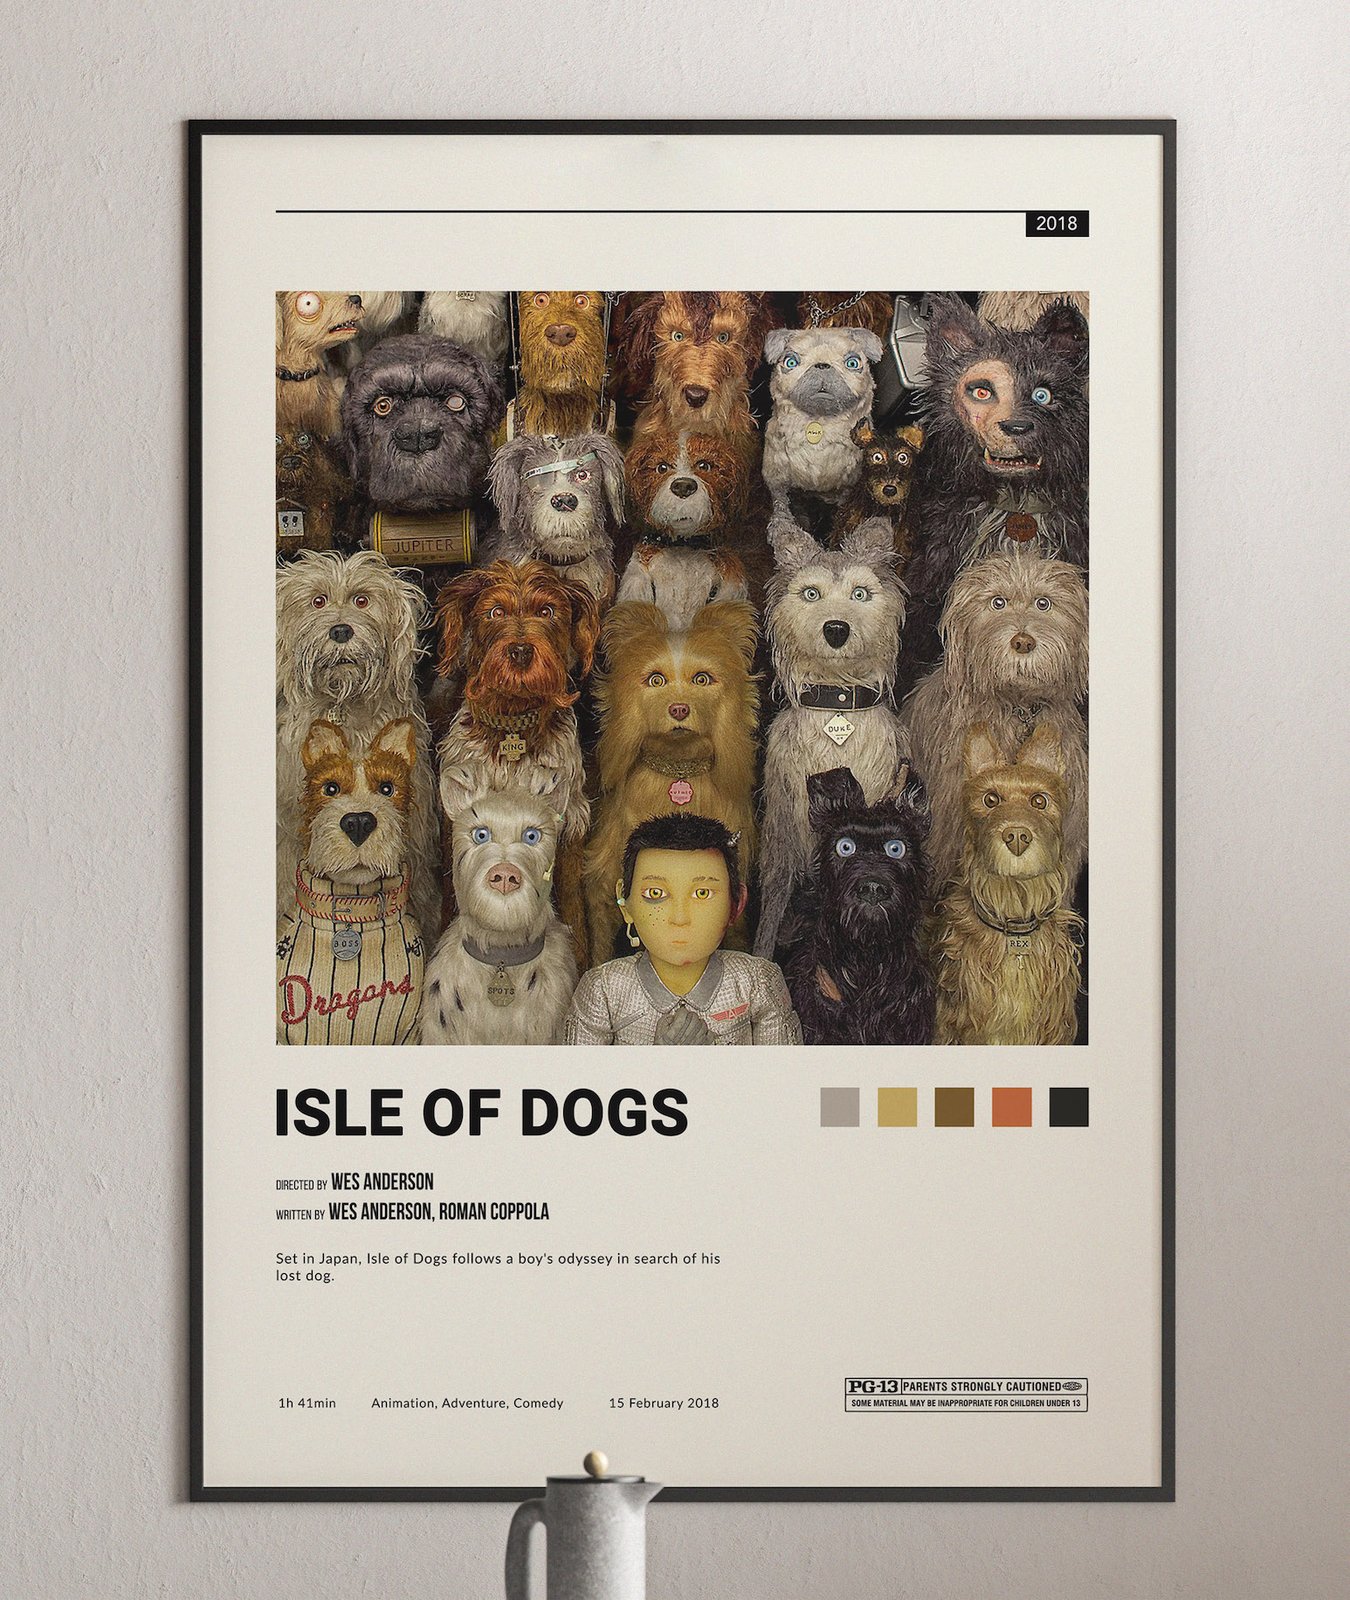 ISLE OF A DOG Original Movie Poster 12x27" Italian WES ANDERSON 